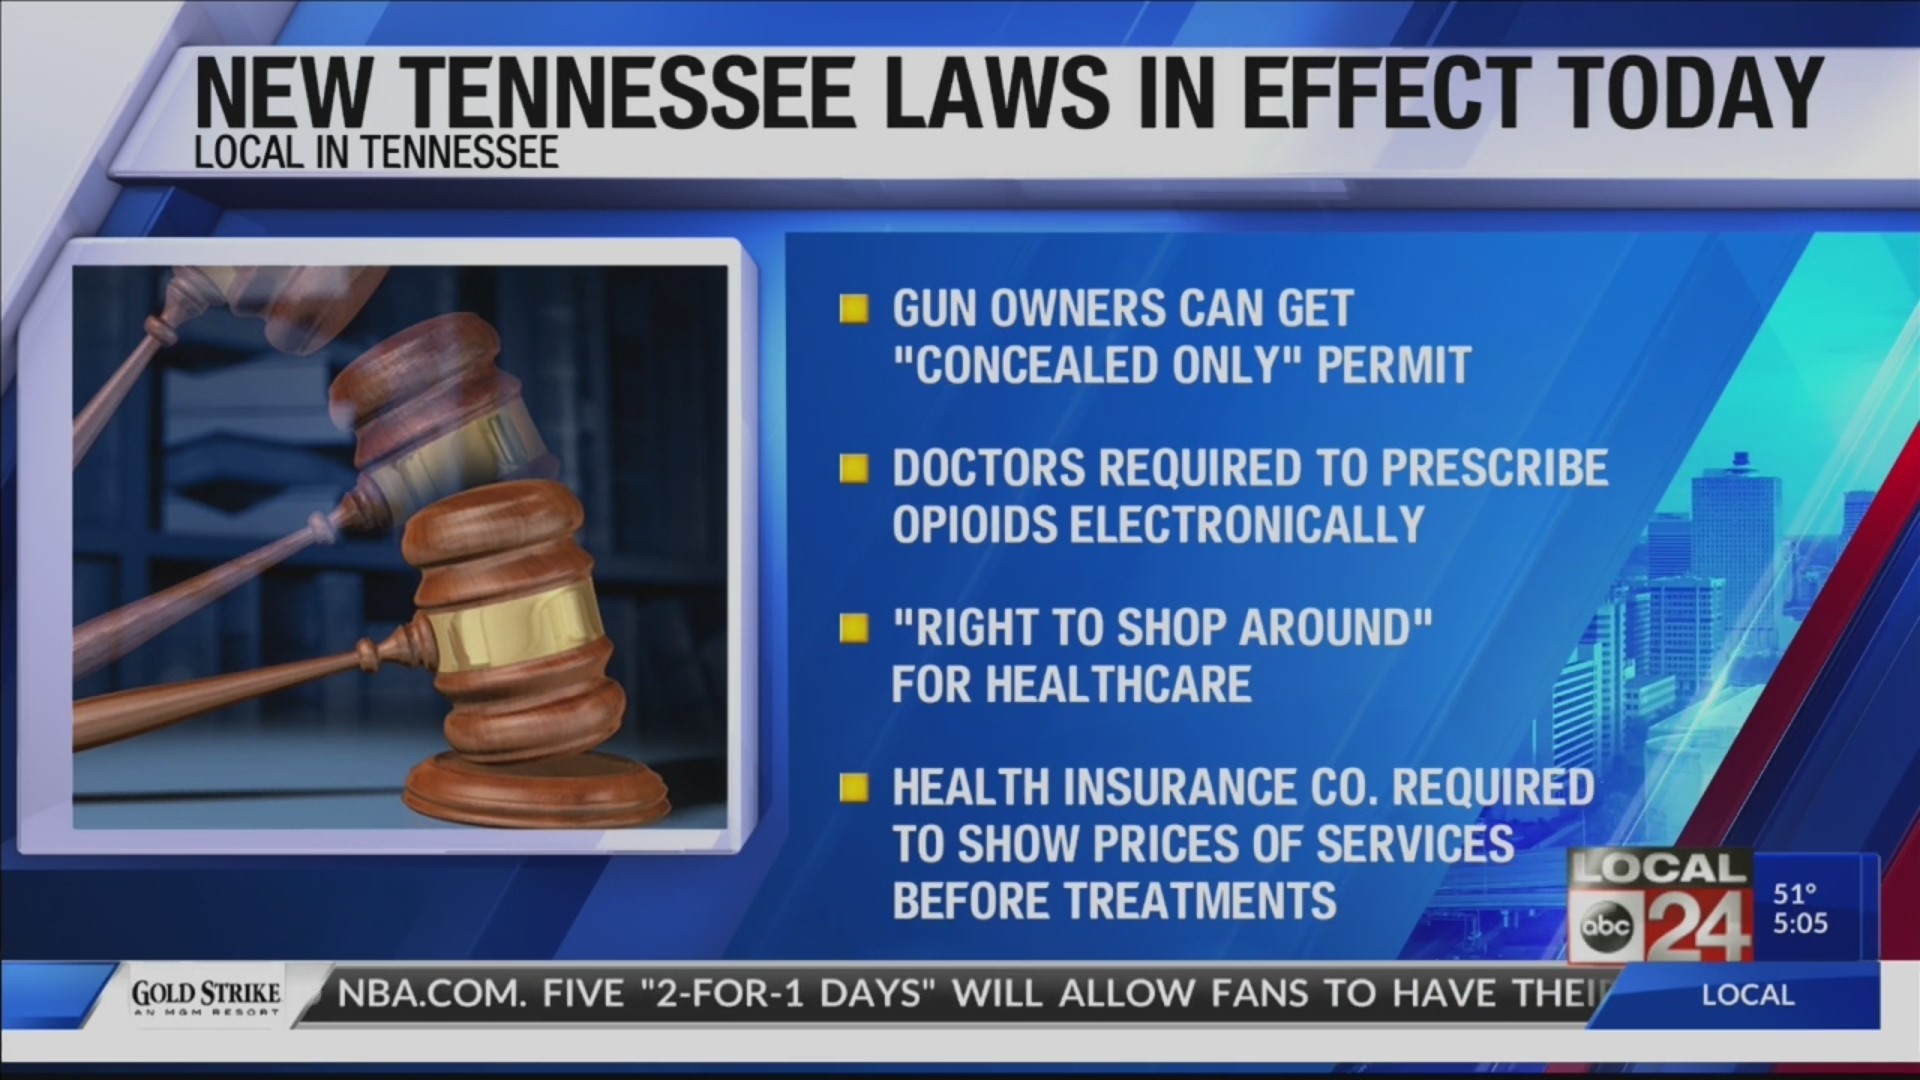 New Tennessee laws for 2020